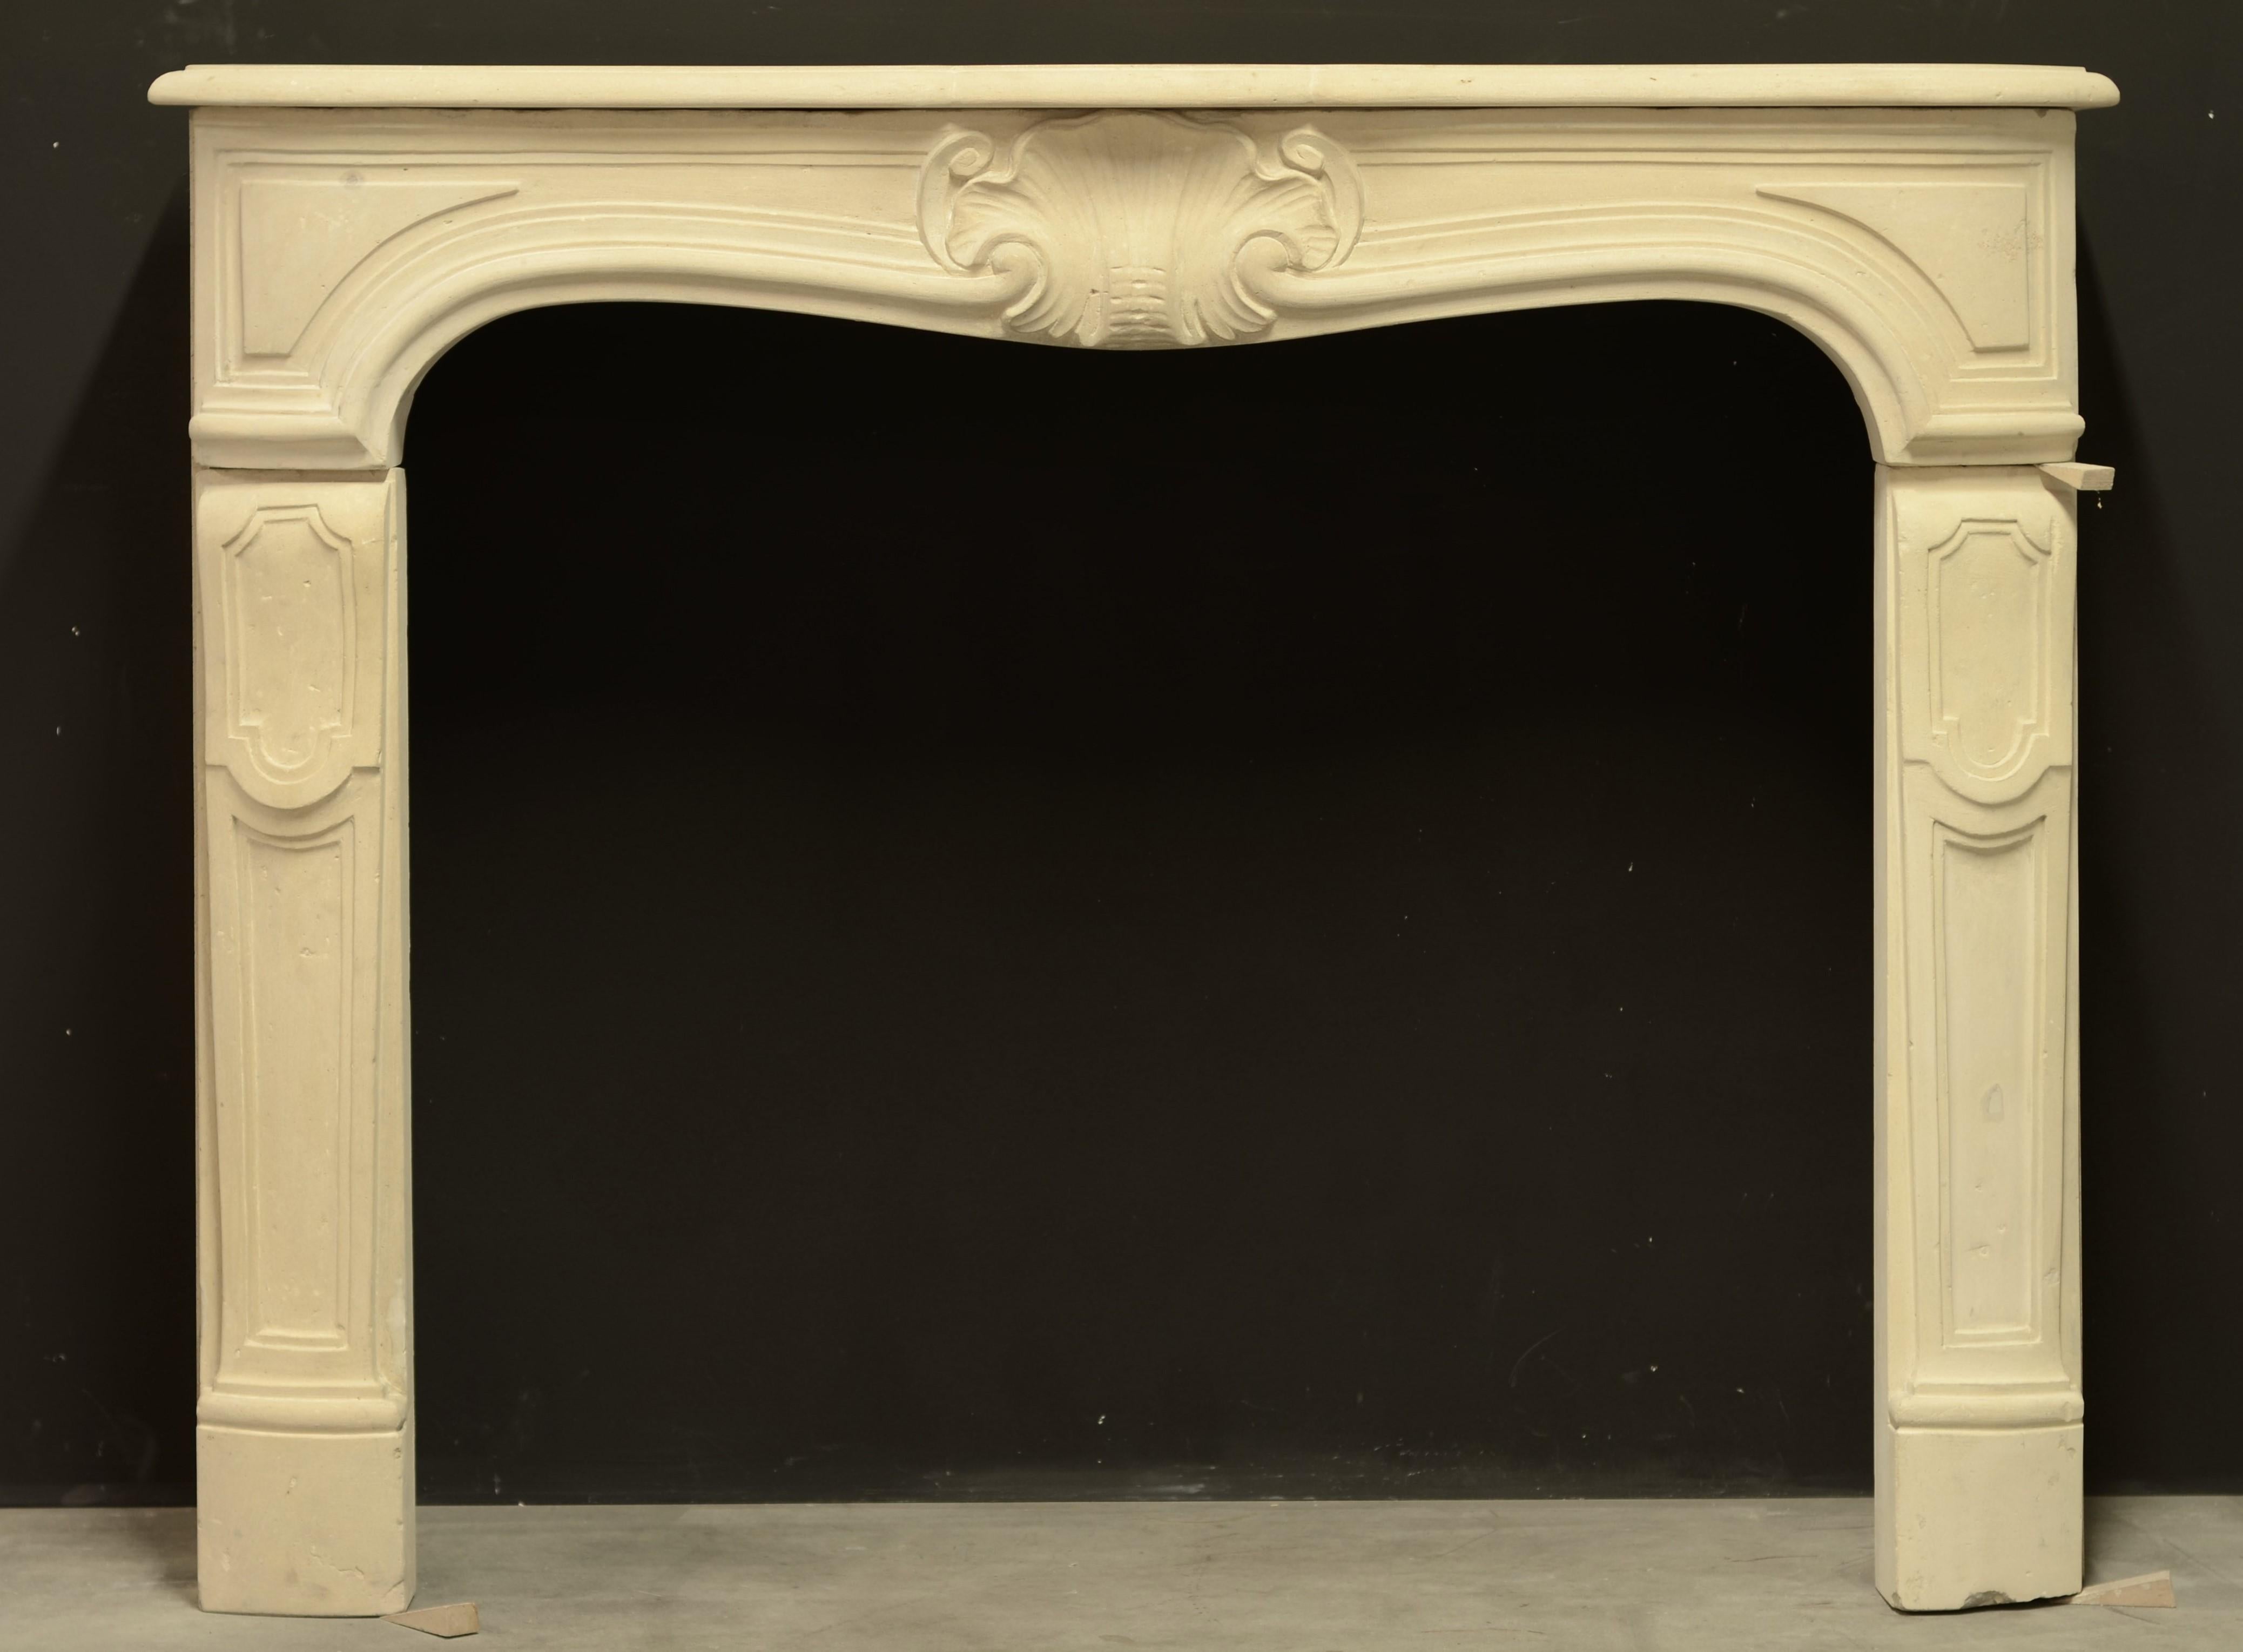 Very nice, small limestone Louis XV from France, 19th century.
Beautiful sweeping frieze with a very detailed and finely carved shell.

The inner dimensions are:
Highest height: 87.5 cm or 34.44 inch
Lowest height (middle) 84 cm. or 33.07